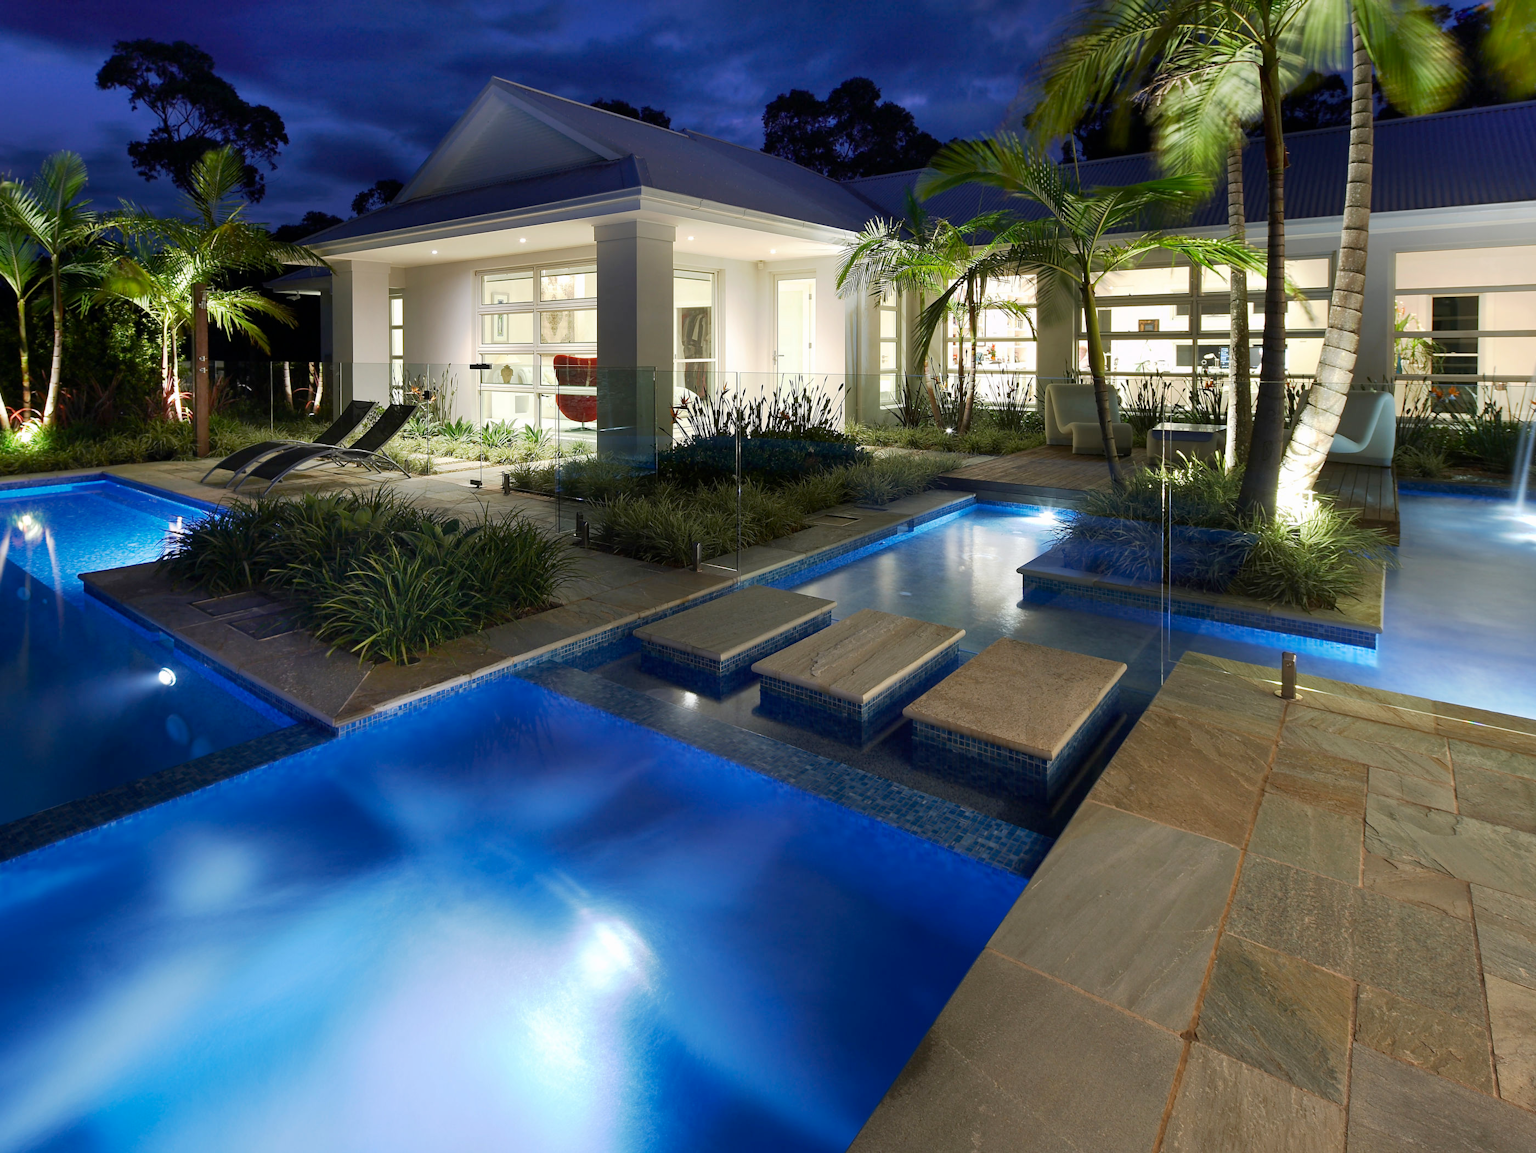 Resort style pool area with Cobb & Co split stone modular paving and stepping stones